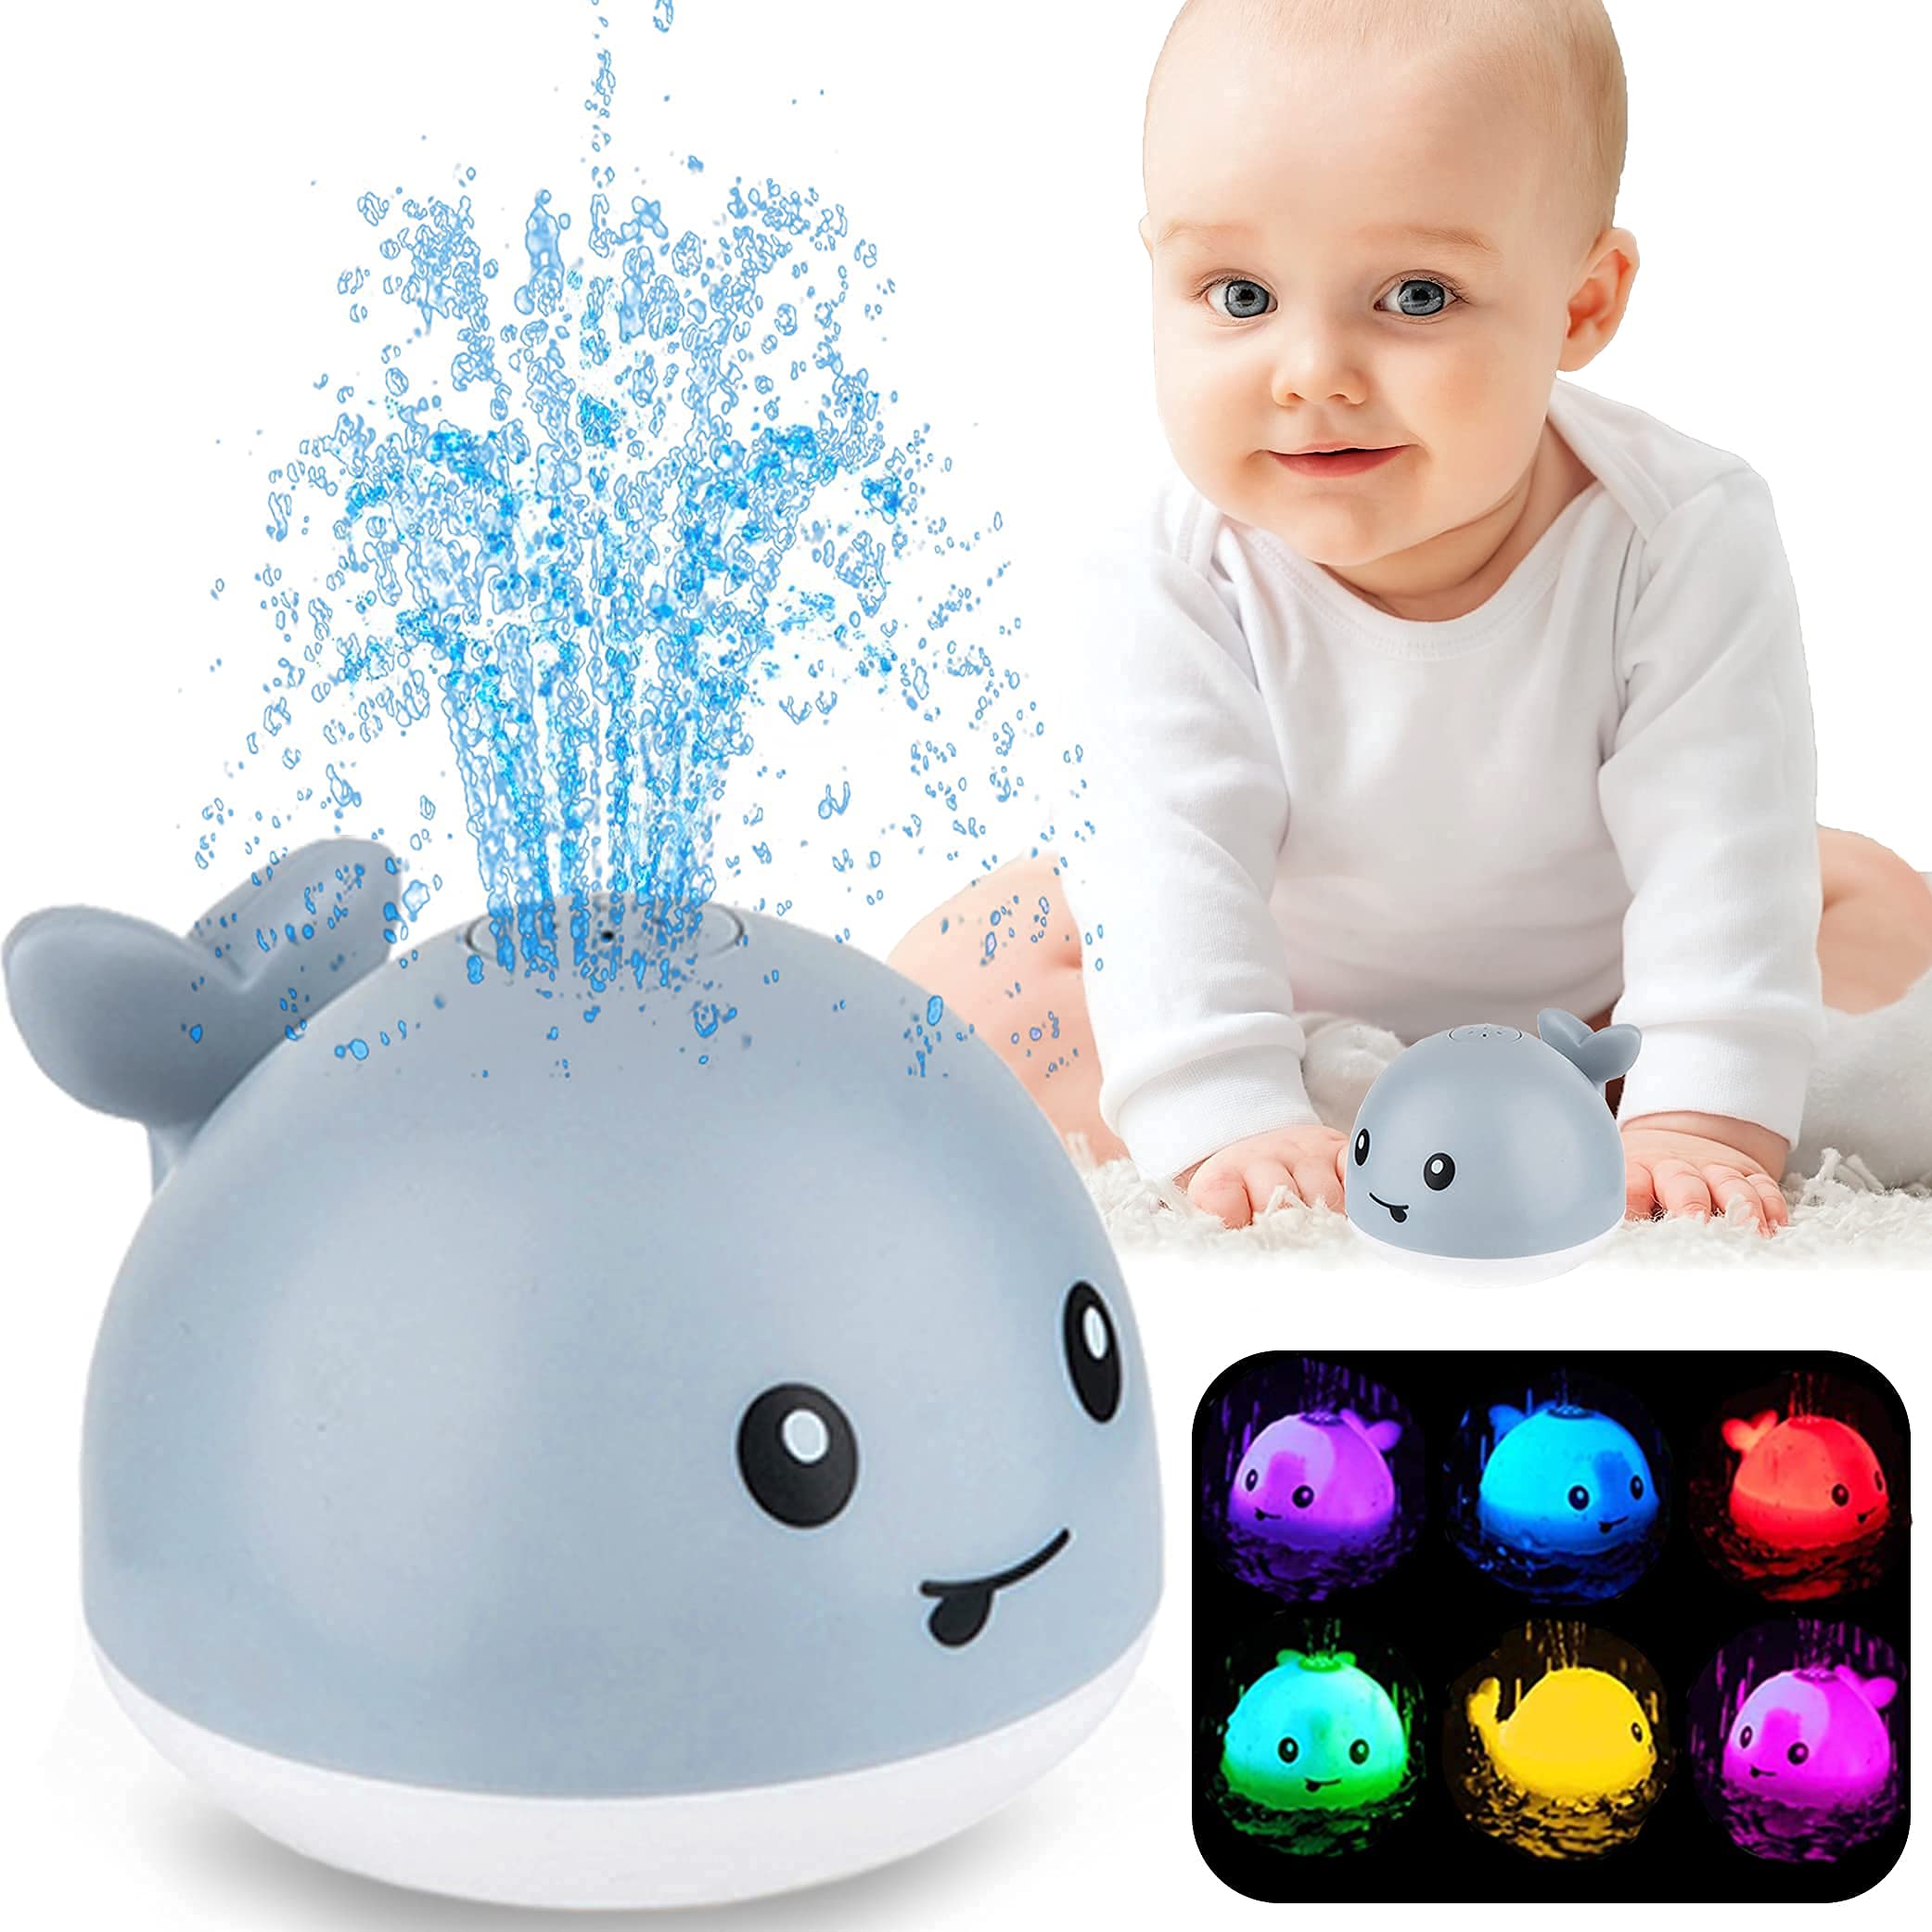 ZHENDUO Baby Bath Toys, Whale Automatic Spray Water Bath Toy, Induction Sprinkler Bathtub Shower Toys for Toddlers Kids Boys Girls, Pool Toy for Baby (Grey Whale)